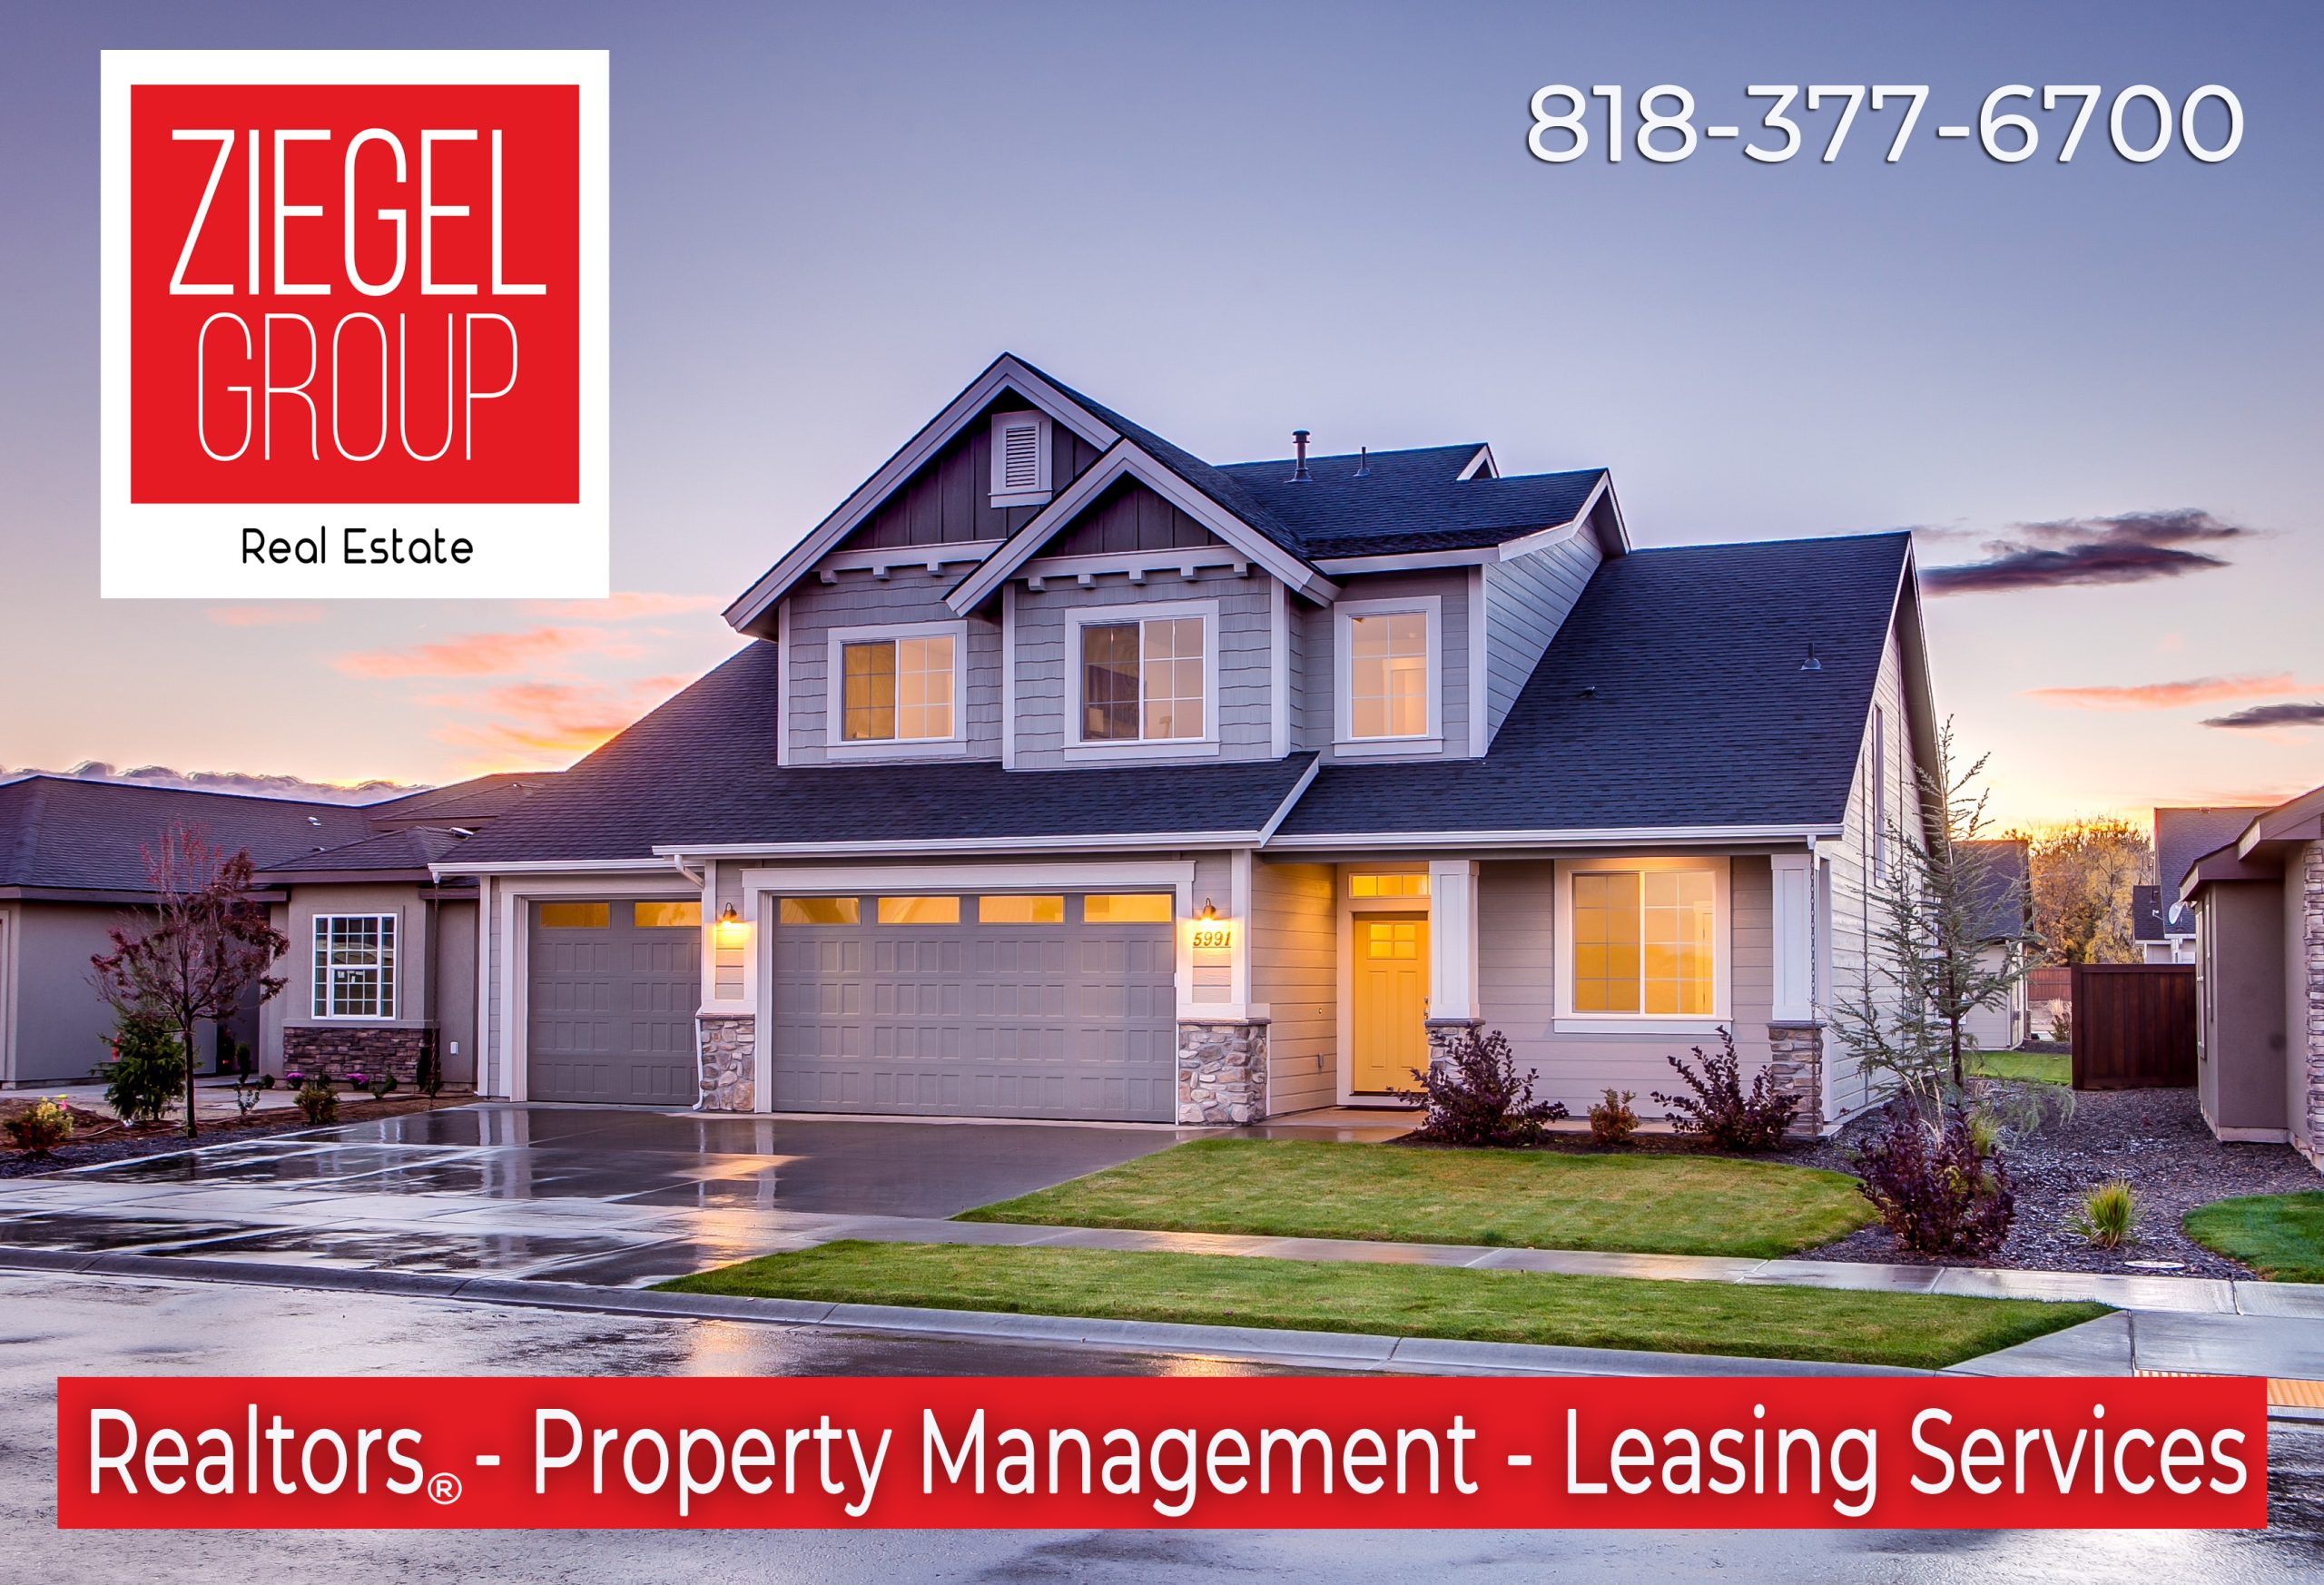 Ziegel Group Realty